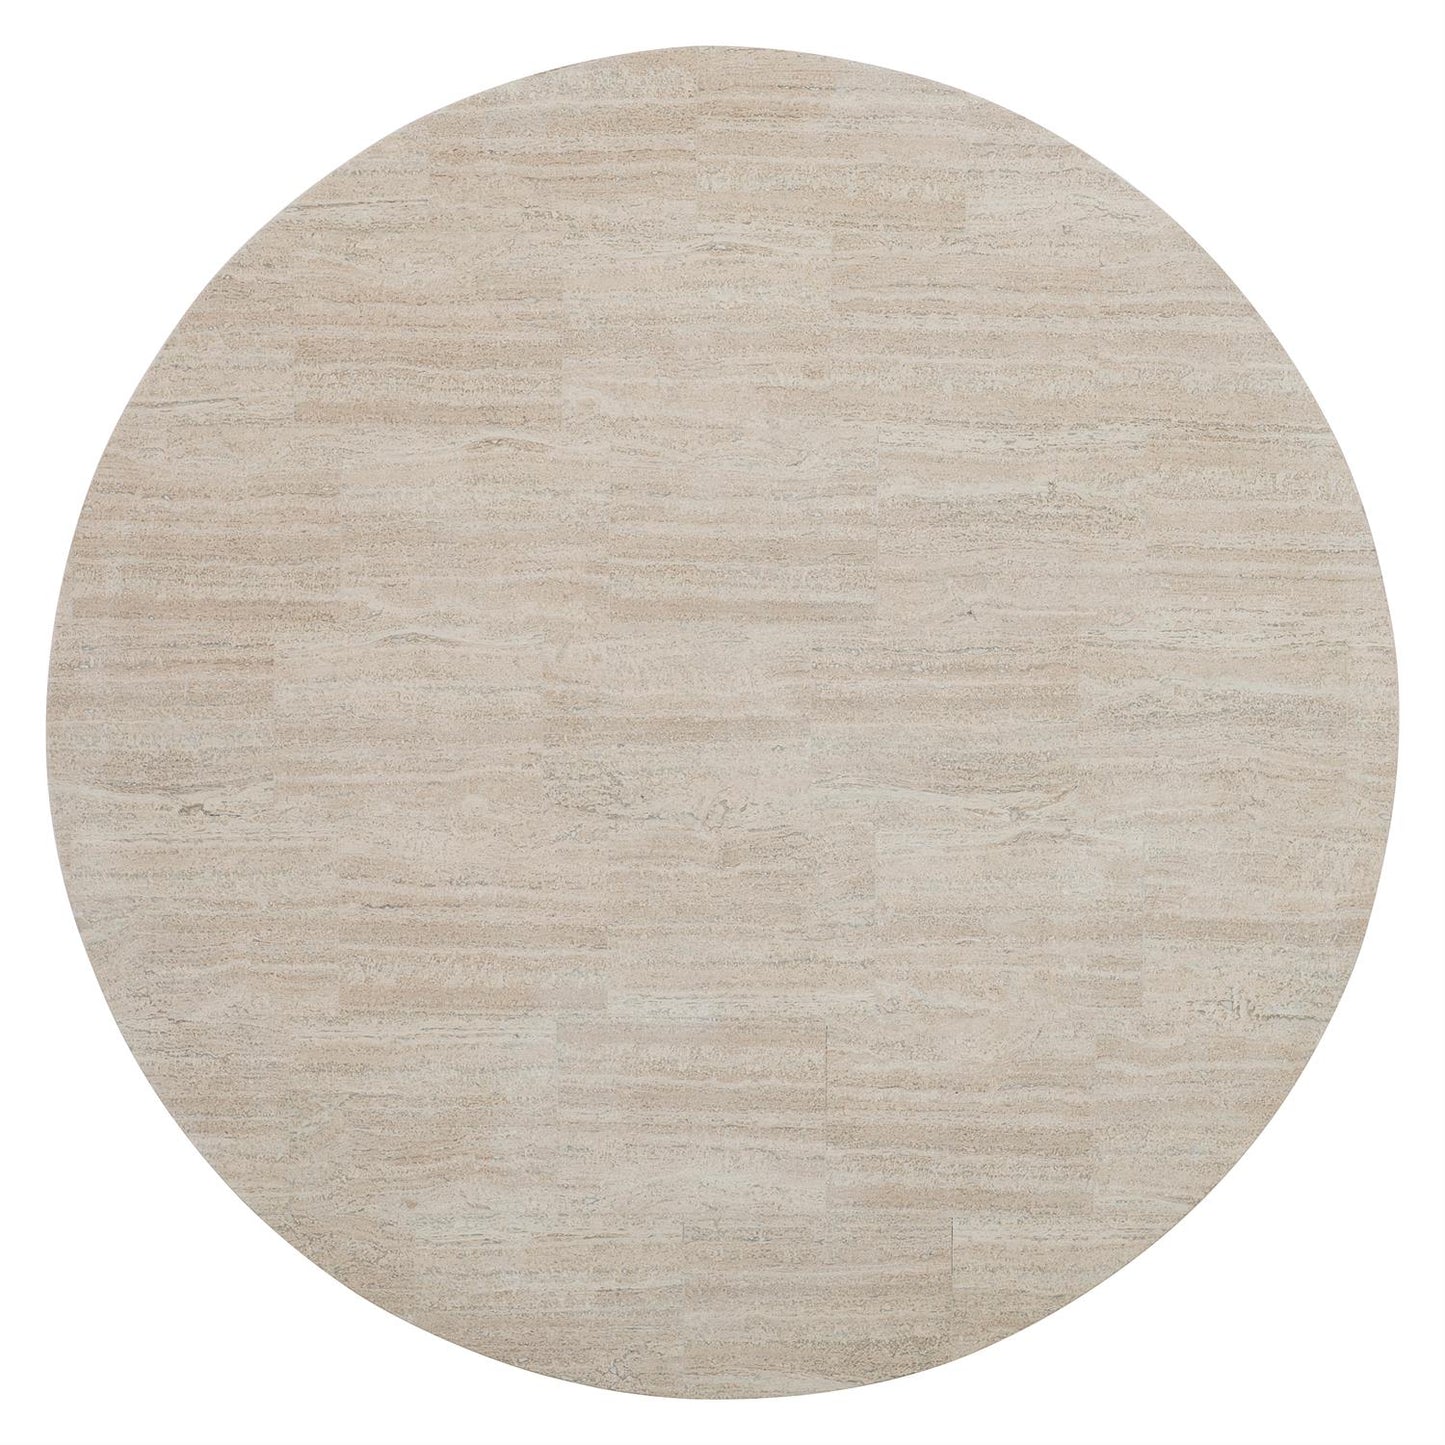 Round (or oval) stone, 43"r